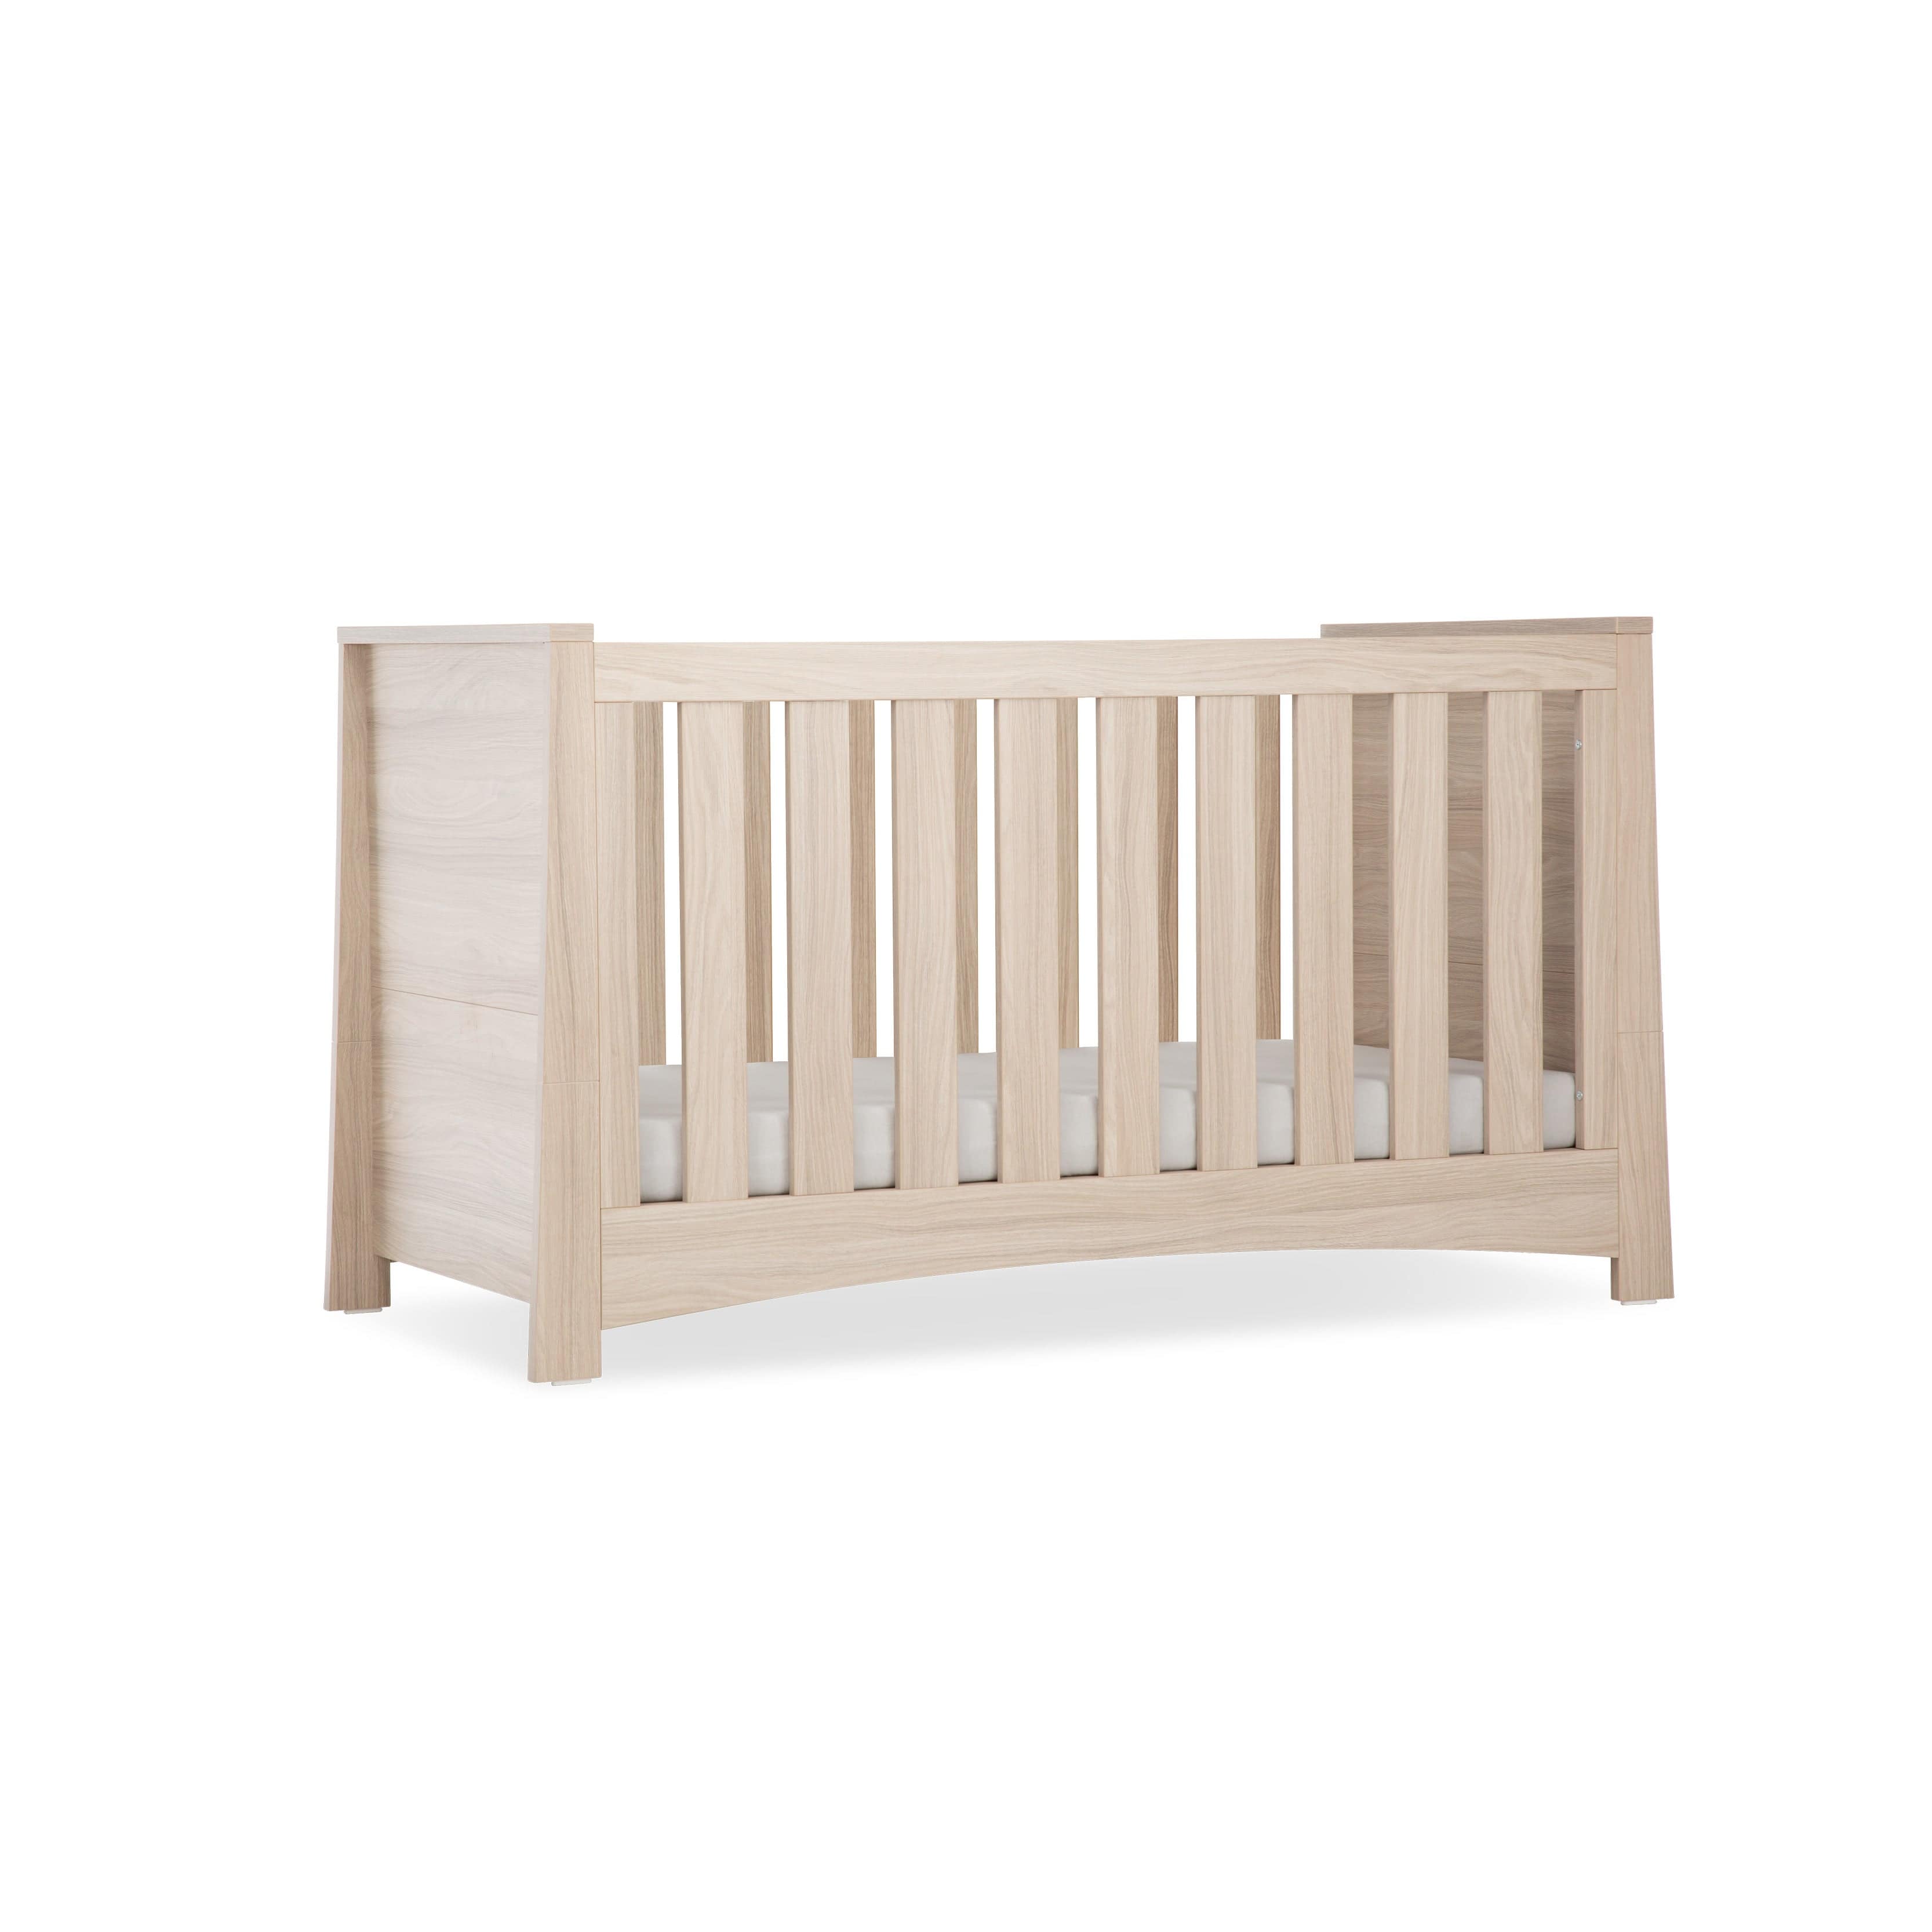 CuddleCo Isla Cotbed in Ash Cot Beds